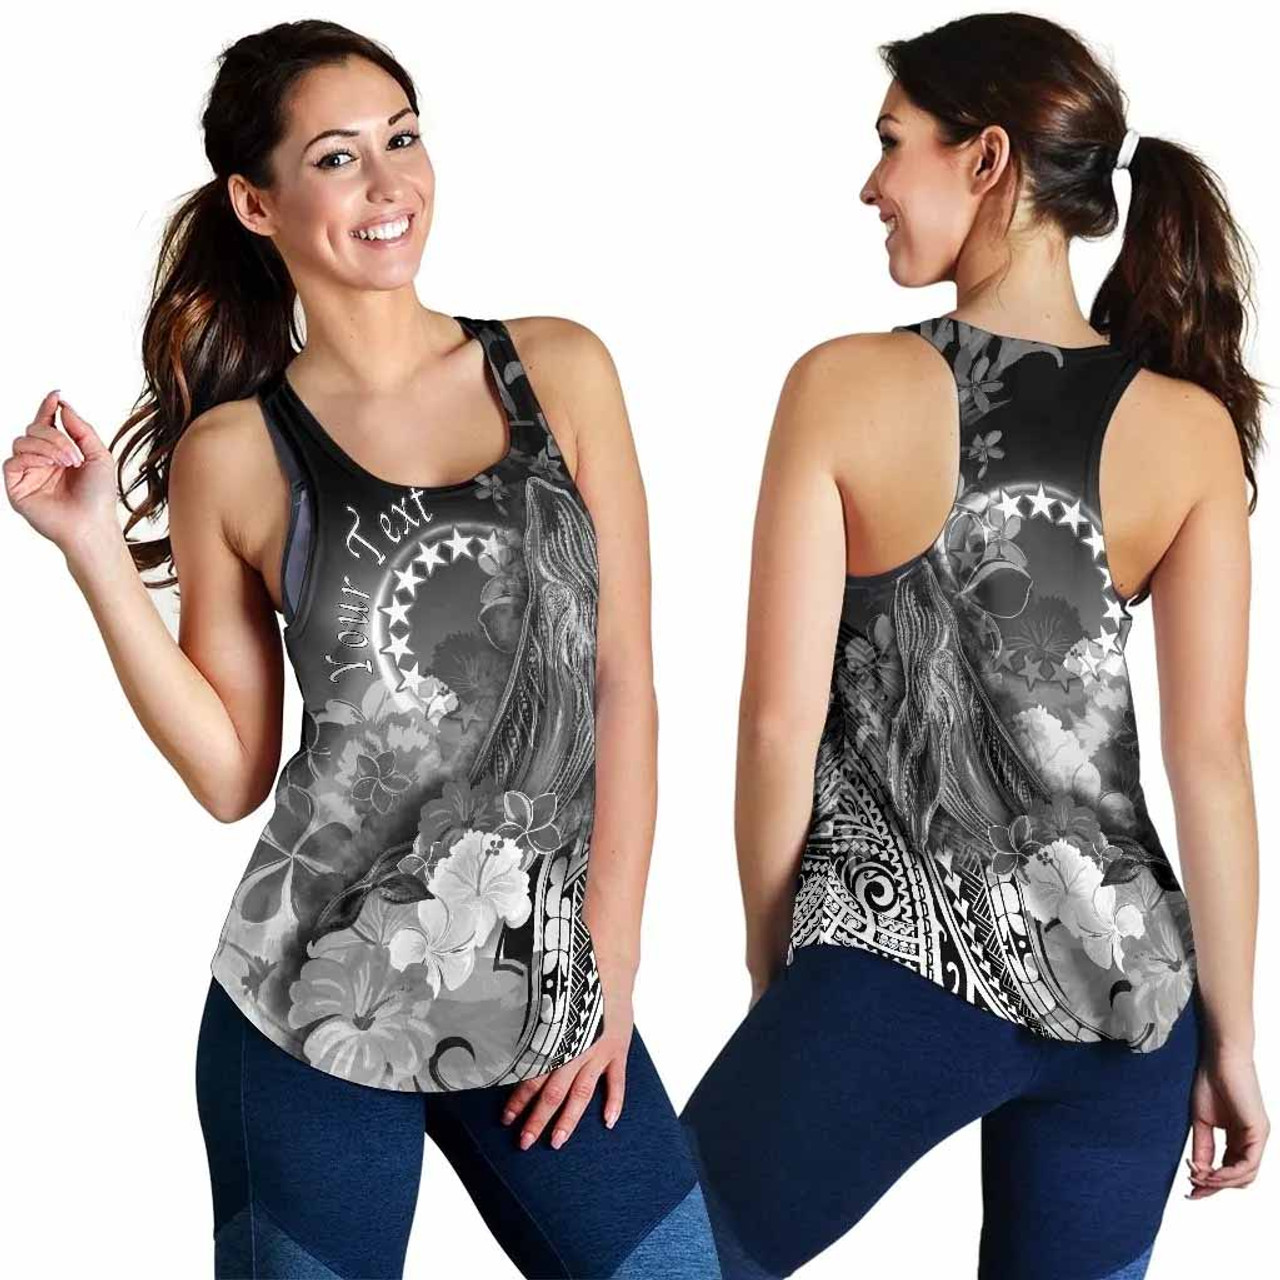 Cook Islands Custom Personalised Women Racerback Tank - Humpback Whale with Tropical Flowers (White) 4